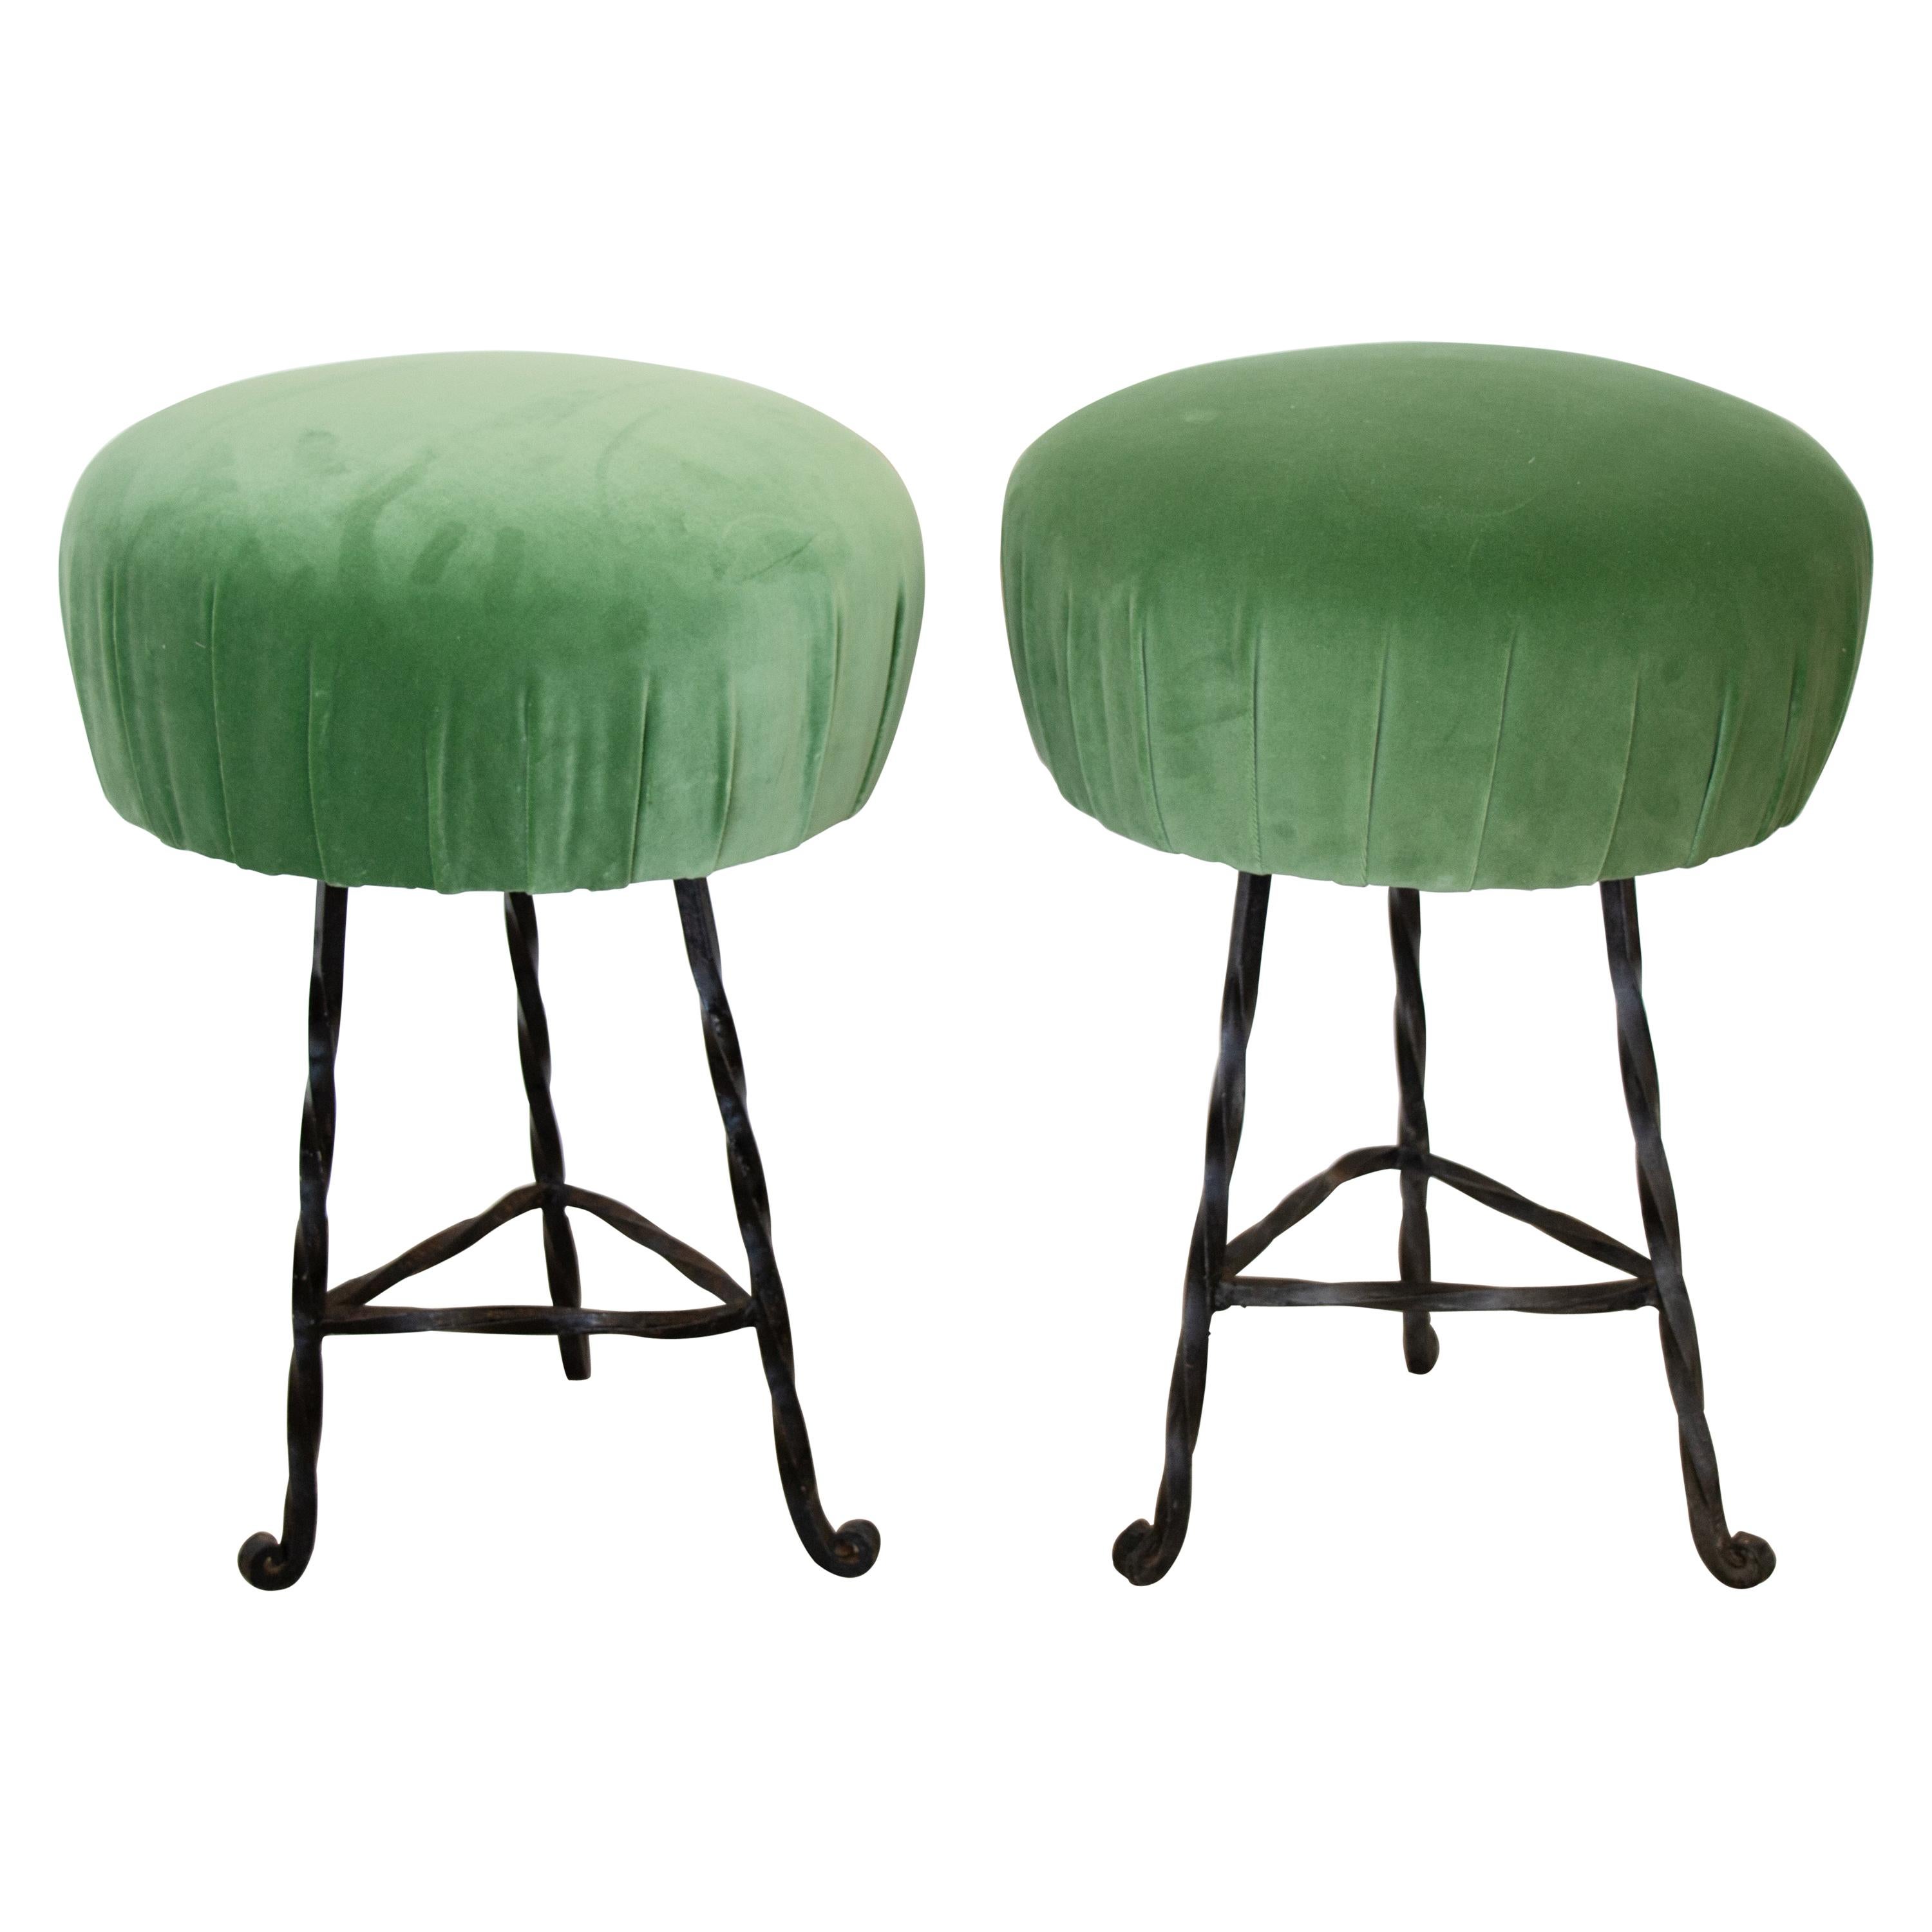 Pair of French Wrought Iron Twisted Stools